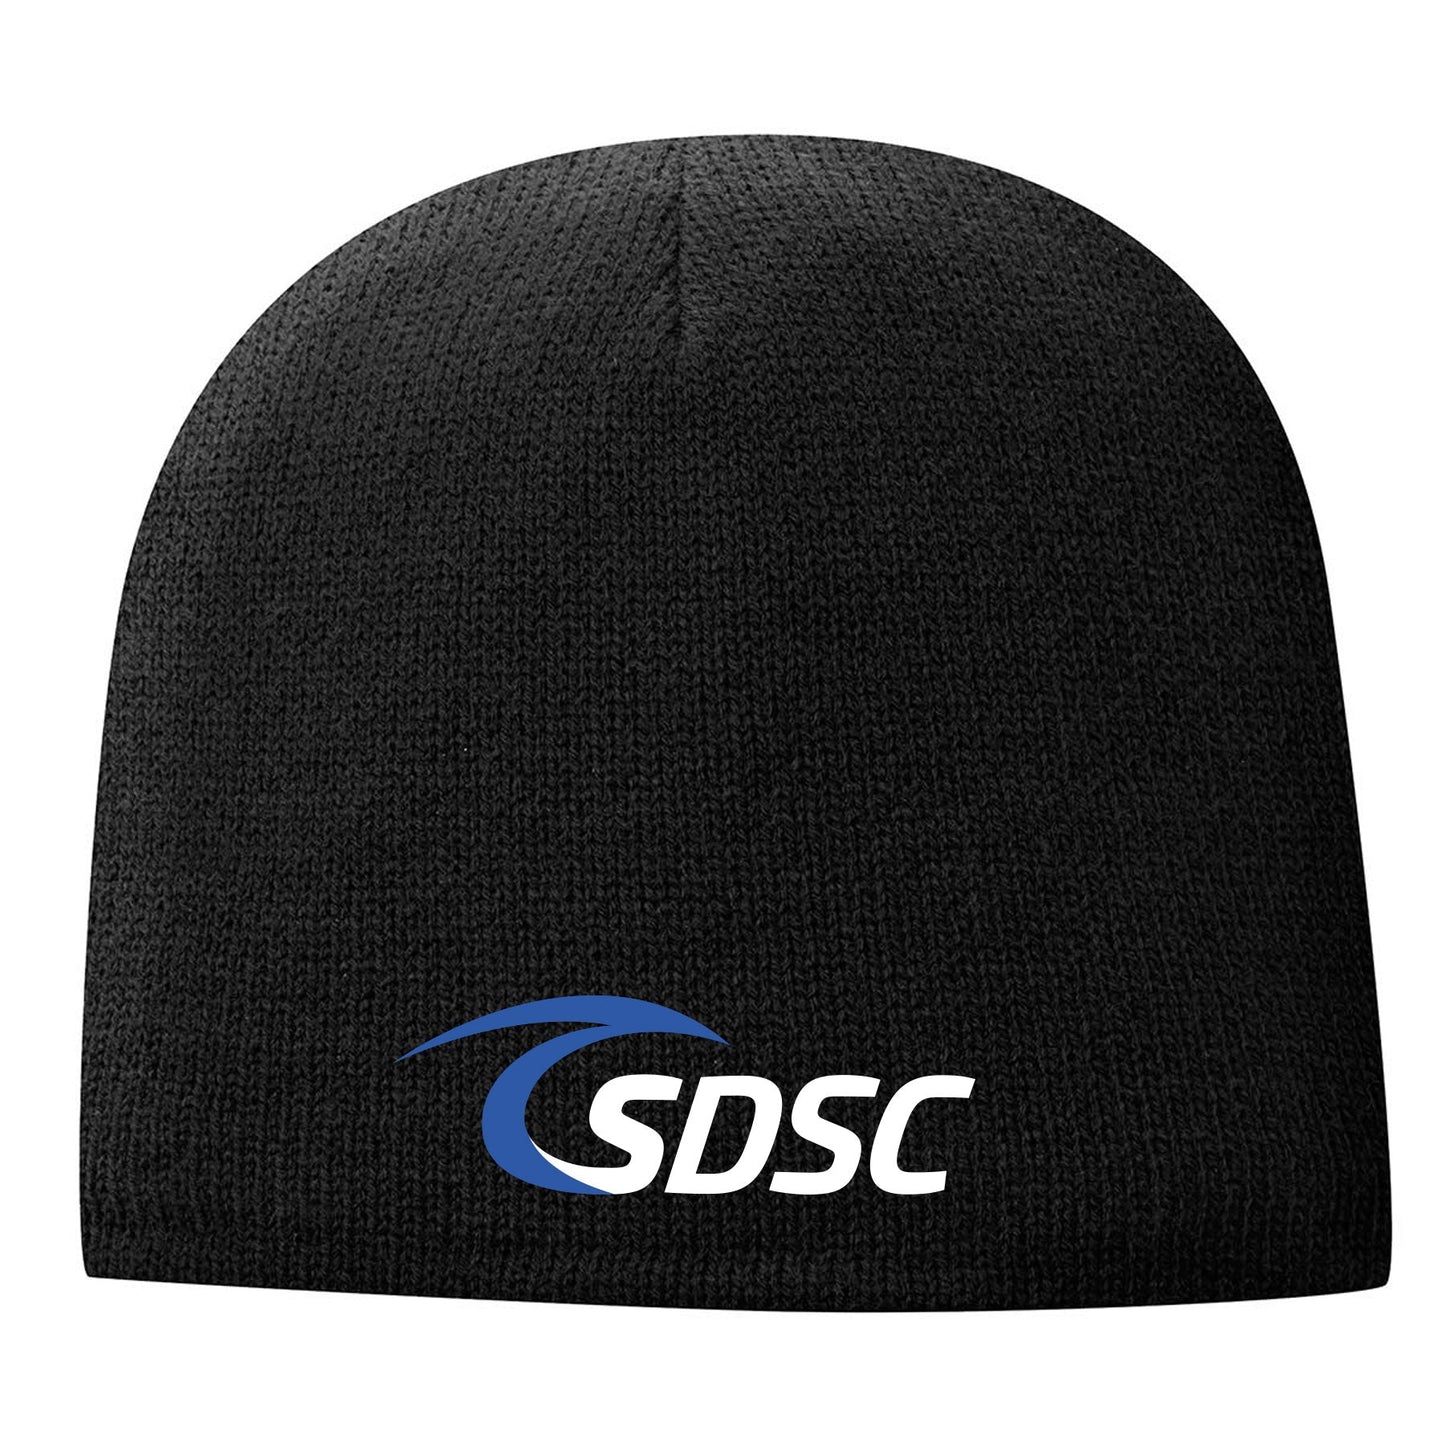 SDSC LOGO WITH NUMBER FLEECE-LINED BEANIE CAP